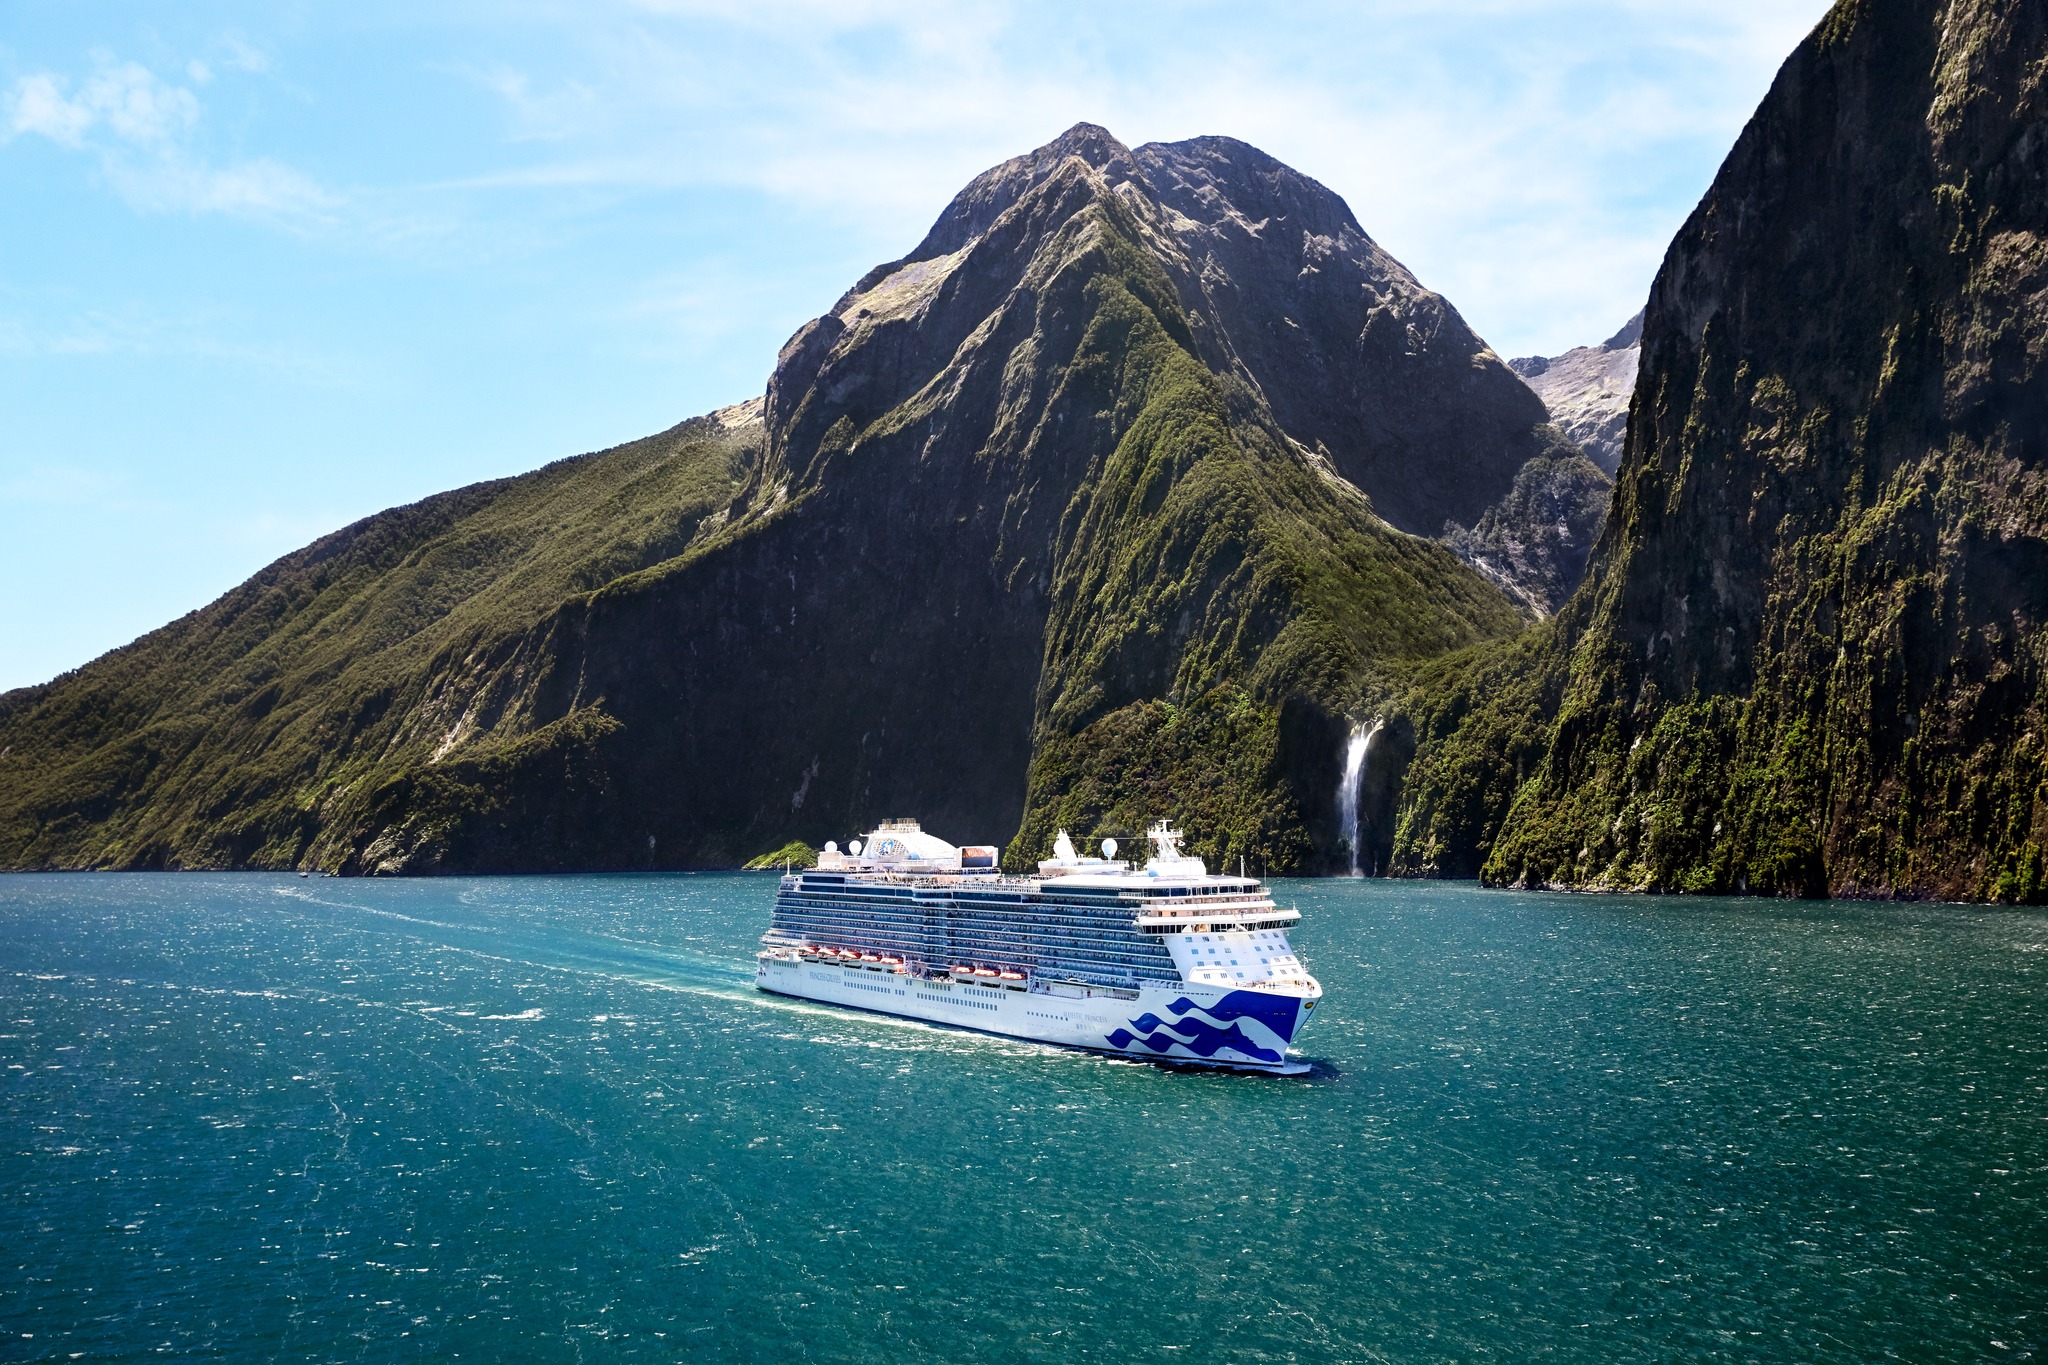 Princess ship sailing through Milford Sound, in New Zealand waters.